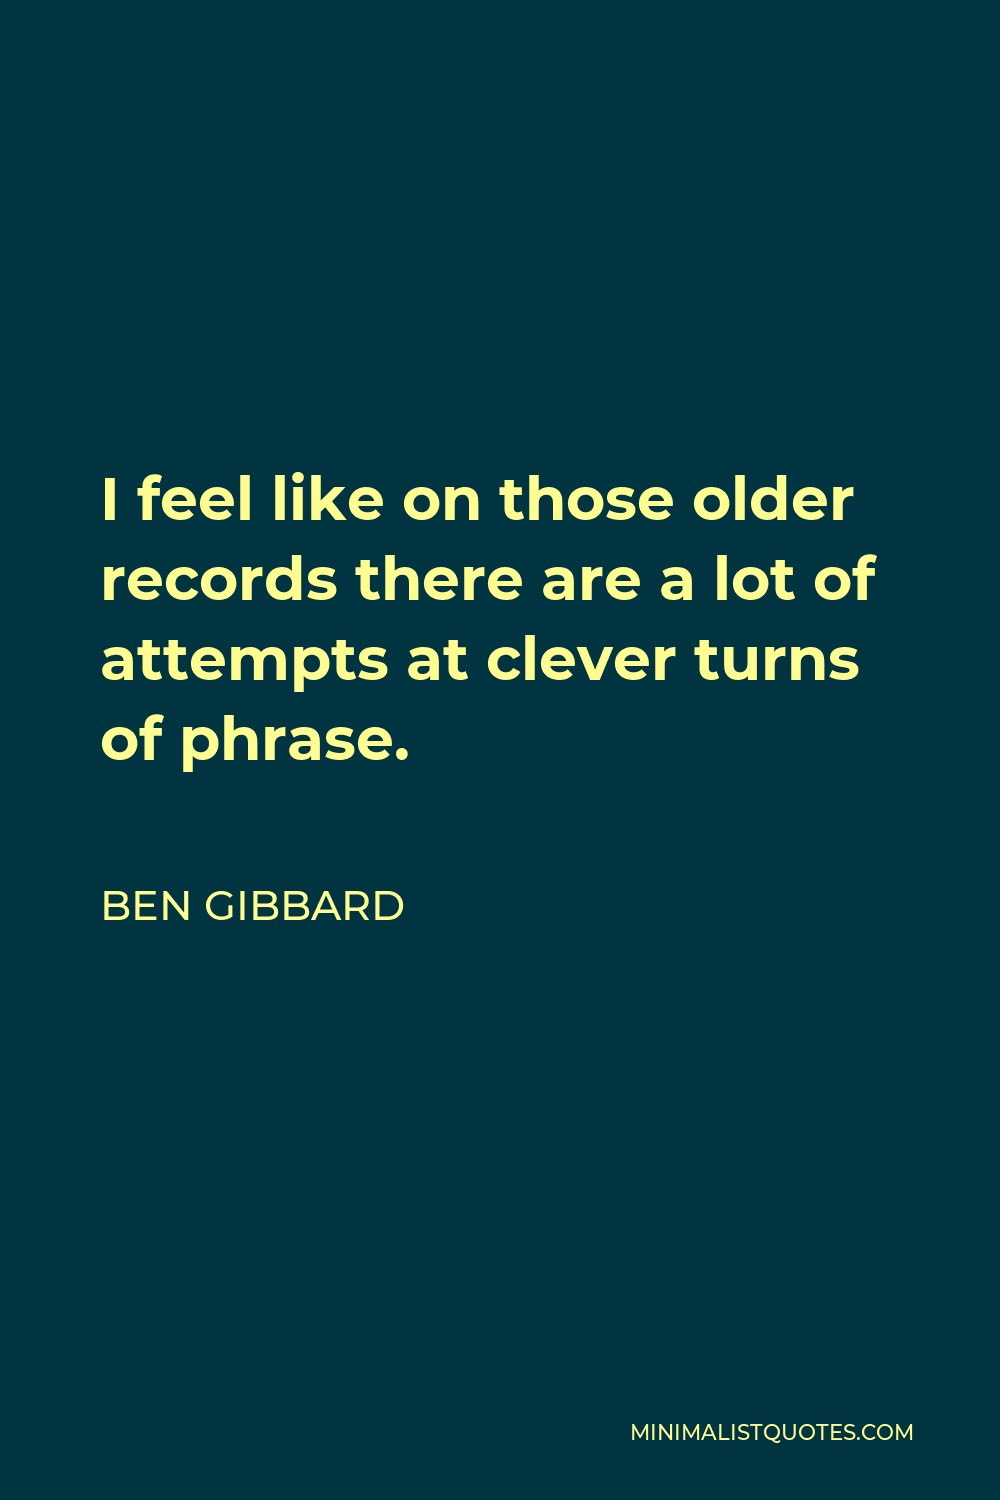 Ben Gibbard Quote - I feel like on those older records there are a lot of attempts at clever turns of phrase.